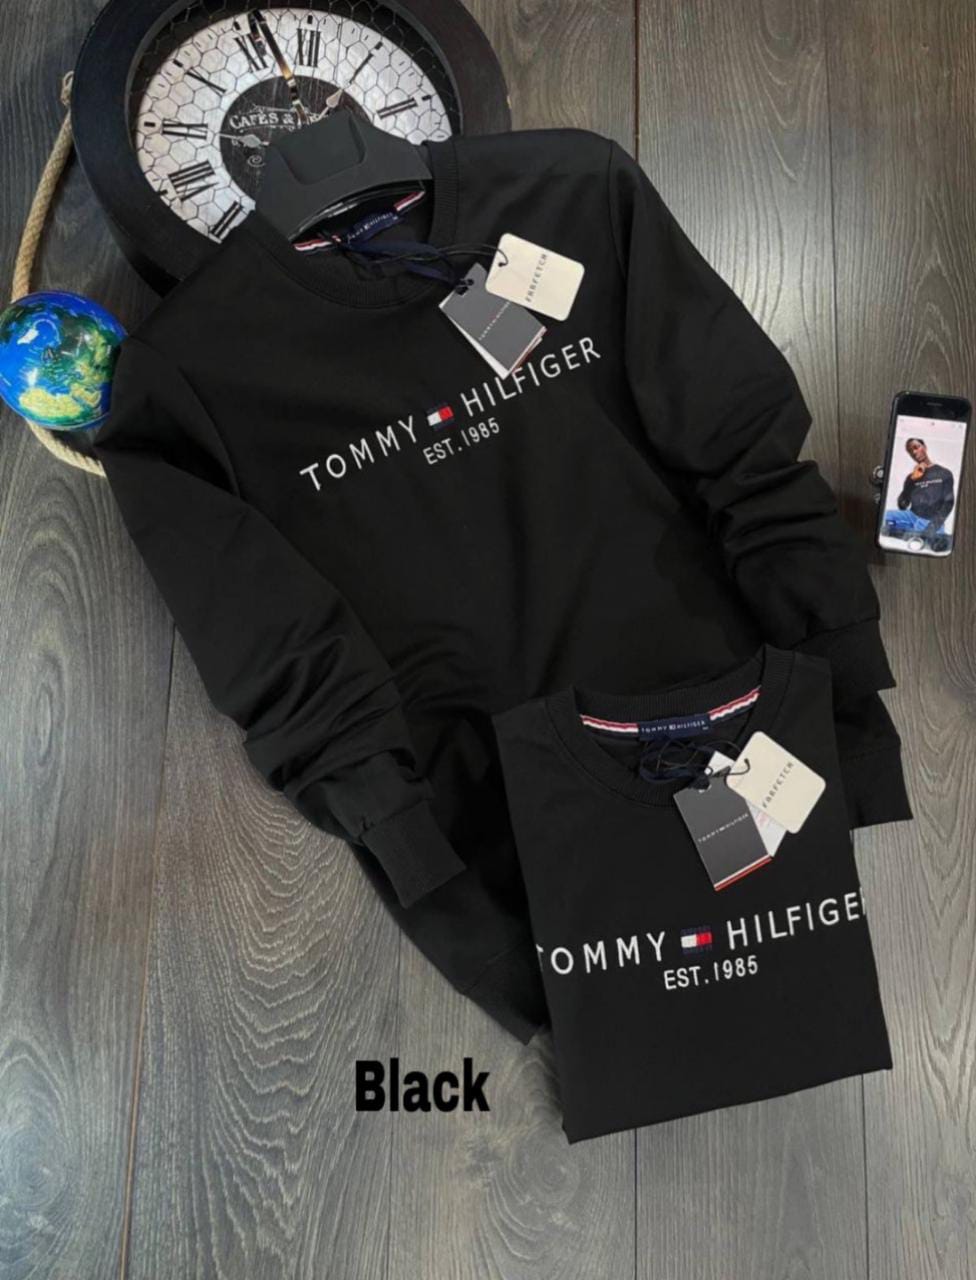 Details View - Tommy Hilfiger t-shirt photos - reseller,reseller marketplace,advetising your products,reseller bazzar,resellerbazzar.in,india's classified site,Tommy Hilfiger t-shirt, Tommy Hilfiger t-shirt in New Mexico, Tommy Hilfiger t-shirt in USA